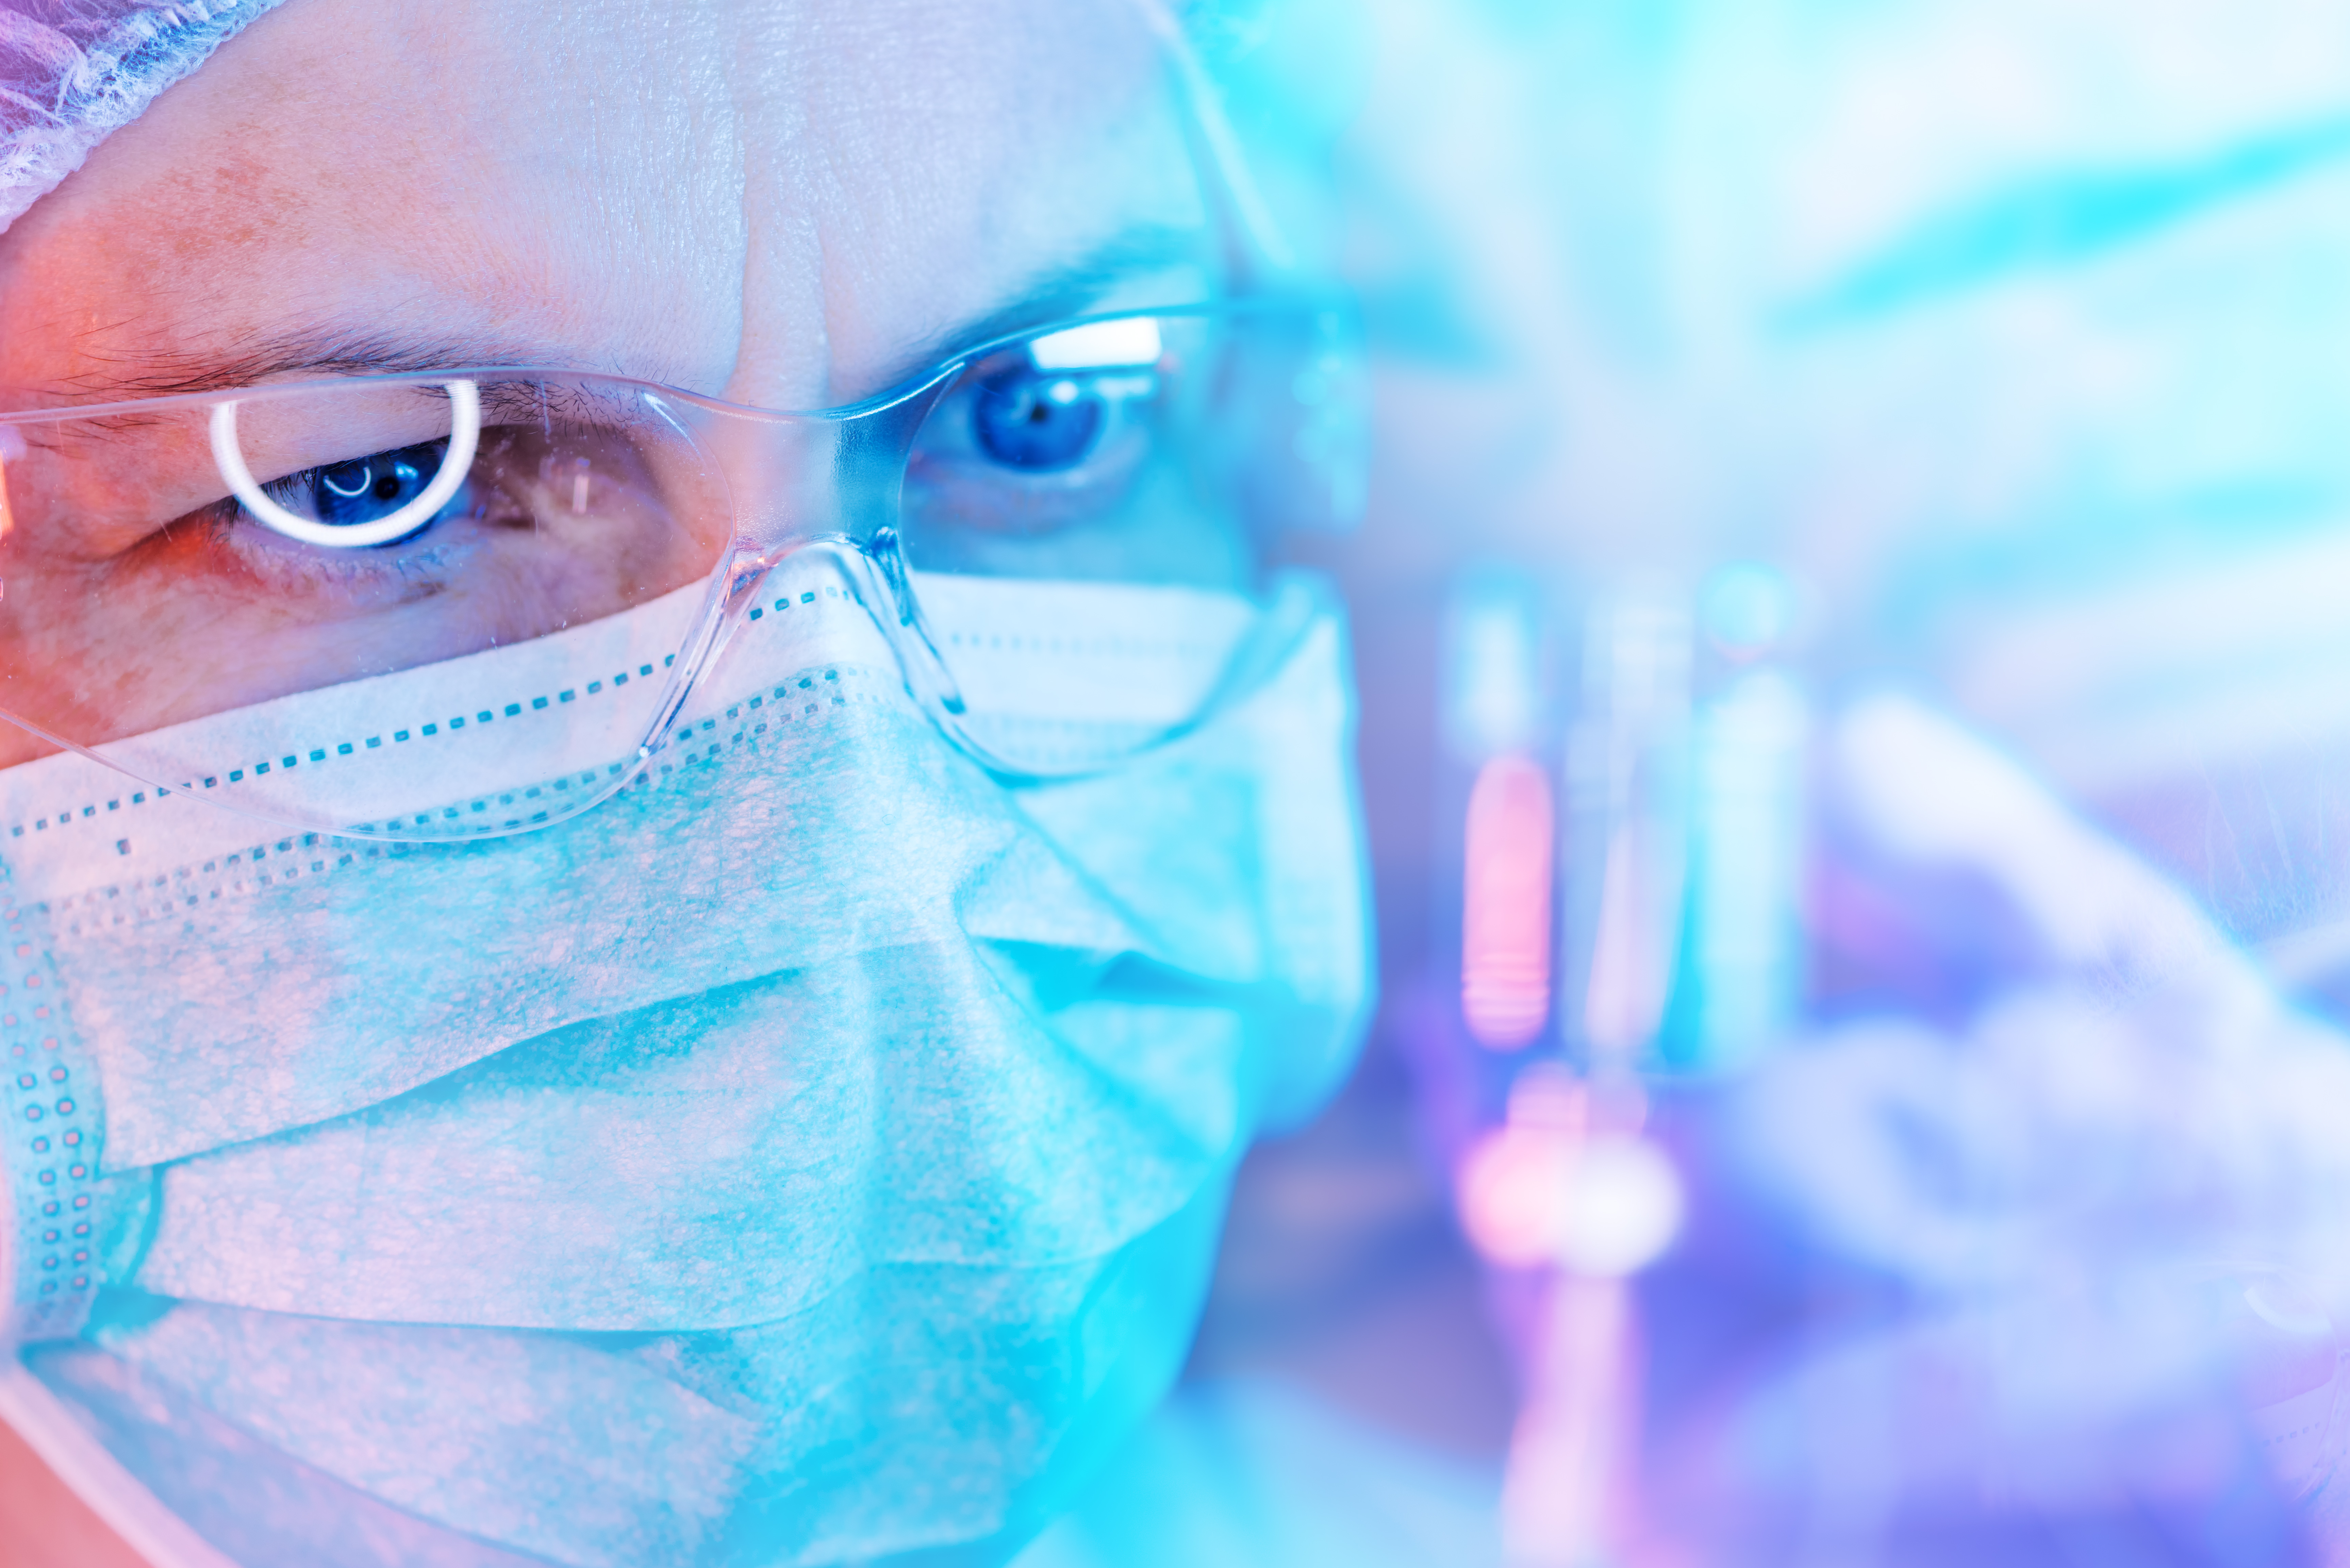 close-up photo of a researcher wearing safety glasses